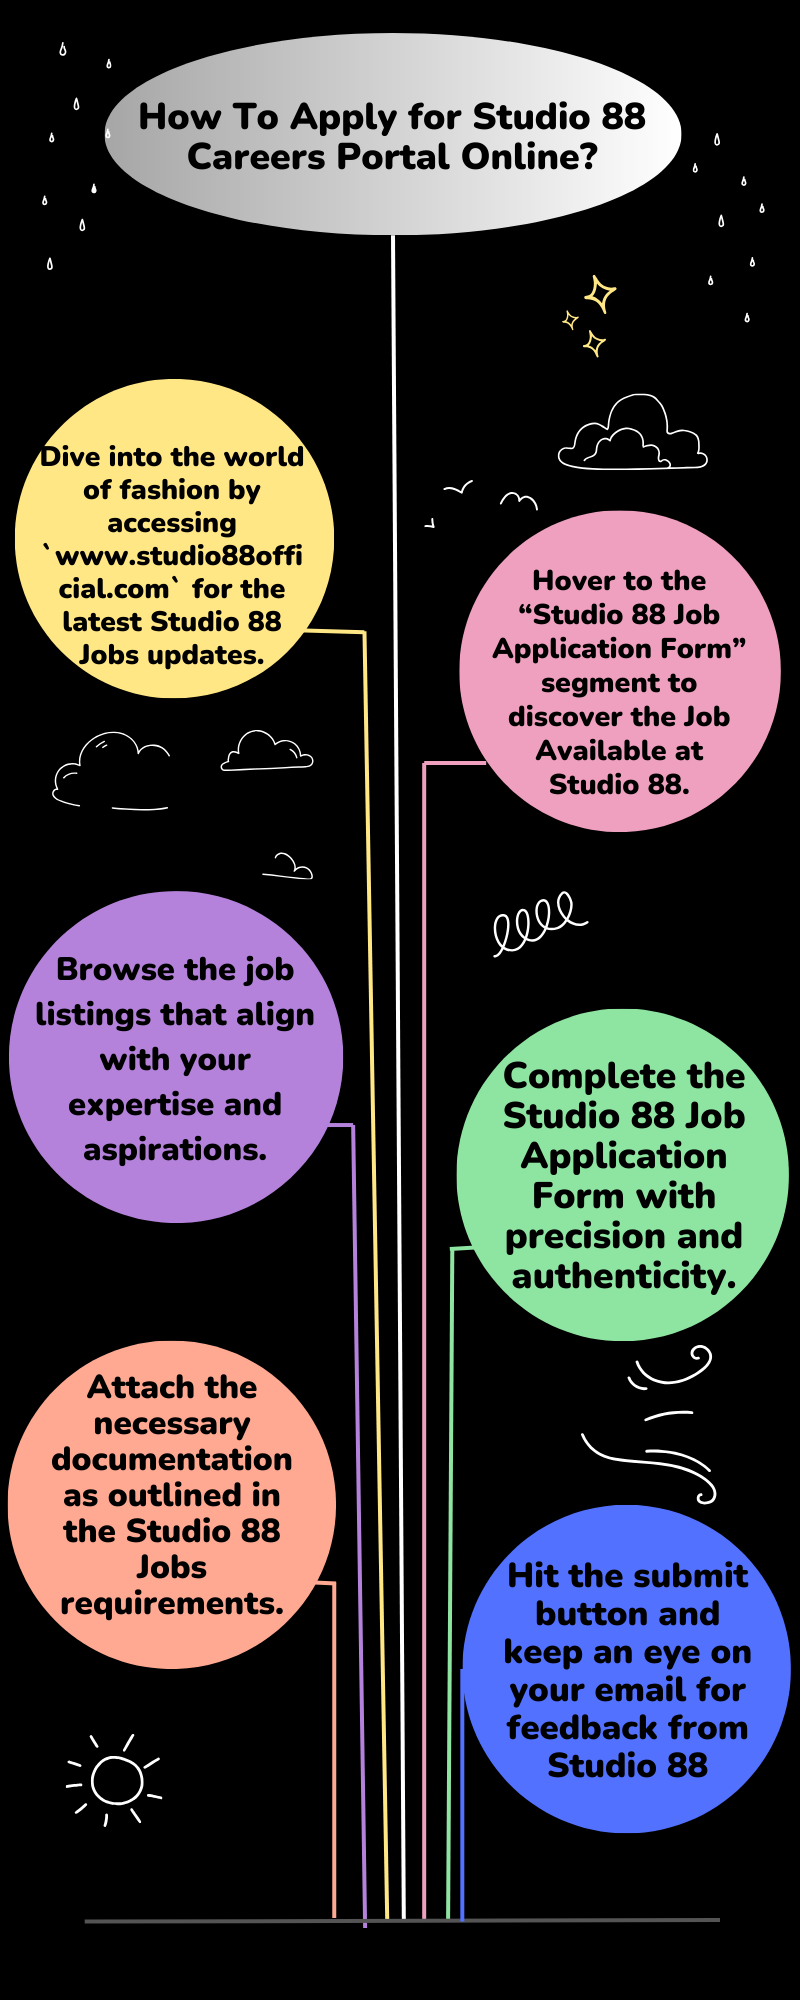 How To Apply for Studio 88 Careers Portal Online?